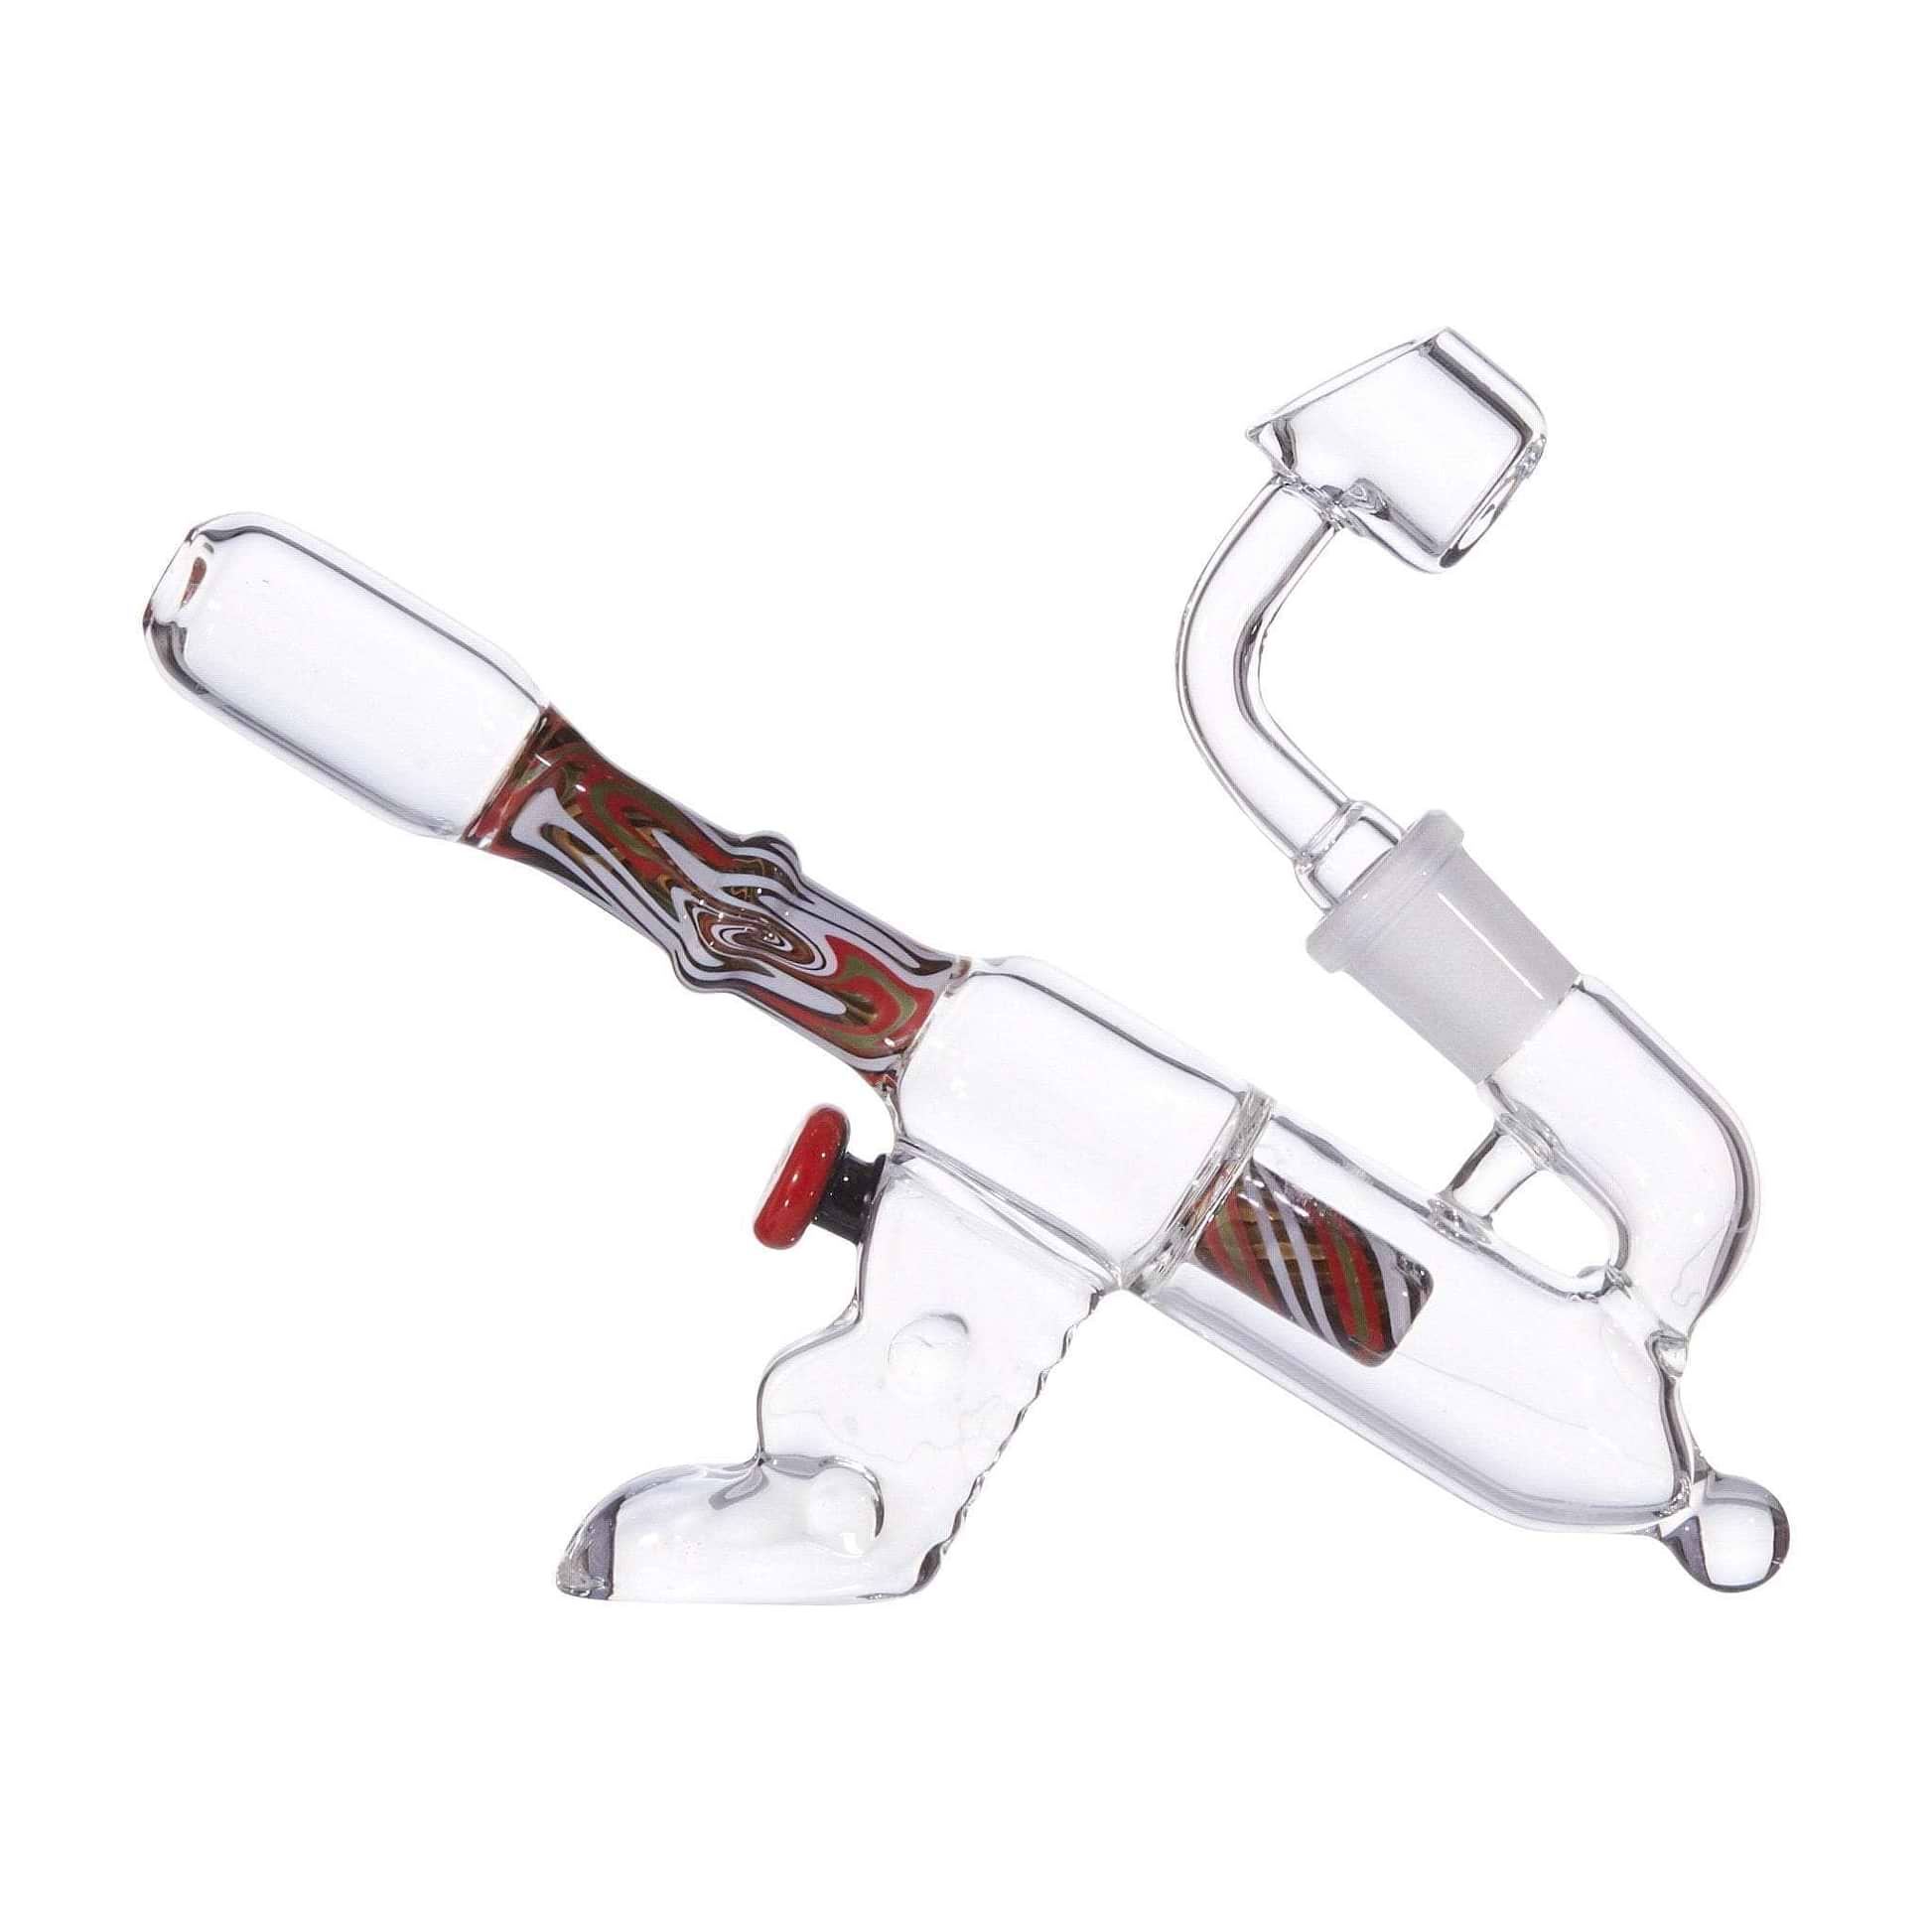 7-inch portable glass dab rig smoking device with UFO perc ray gun shape astro space design